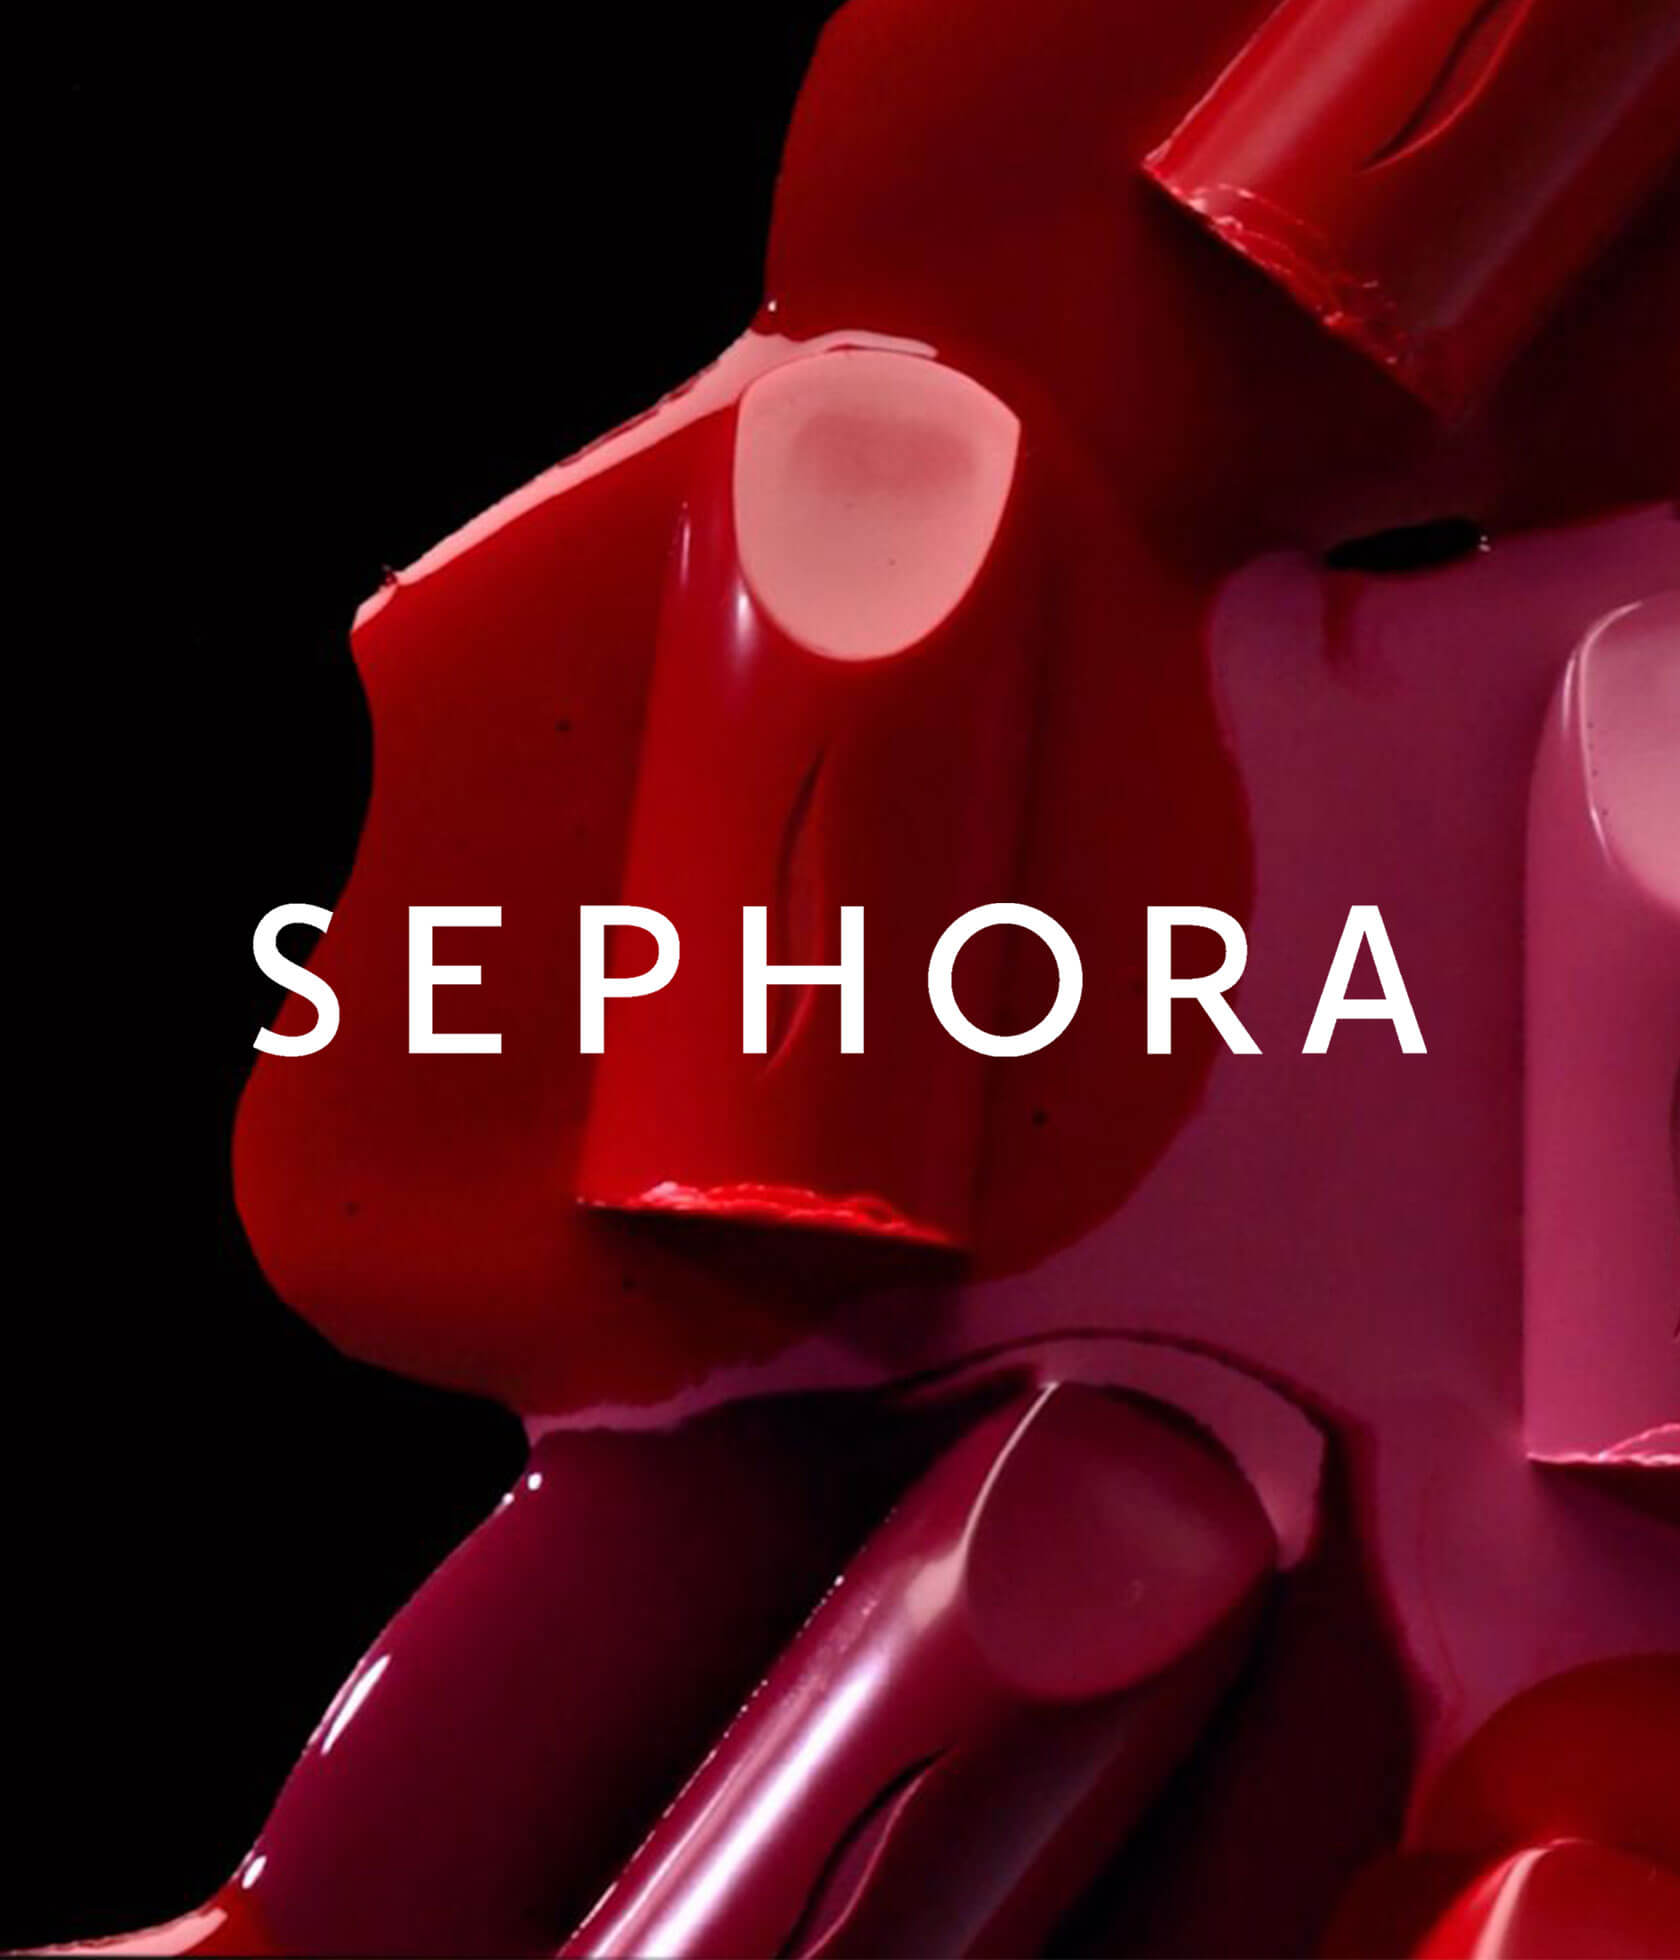 Pay in 4 small payments at Sephora Klarna US